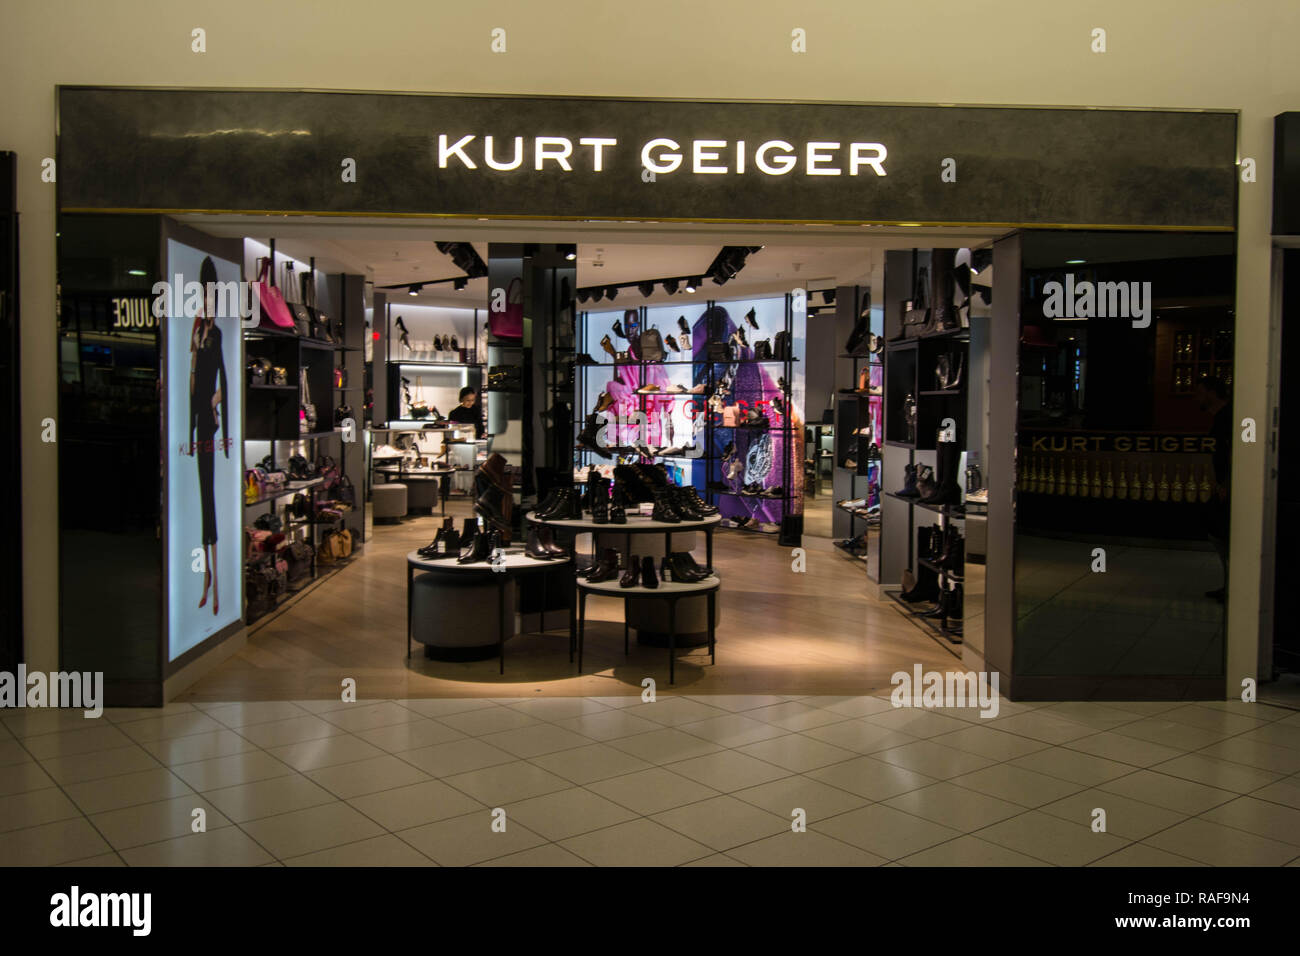 Kurt Geiger Shop High Resolution Stock Photography and Images - Alamy